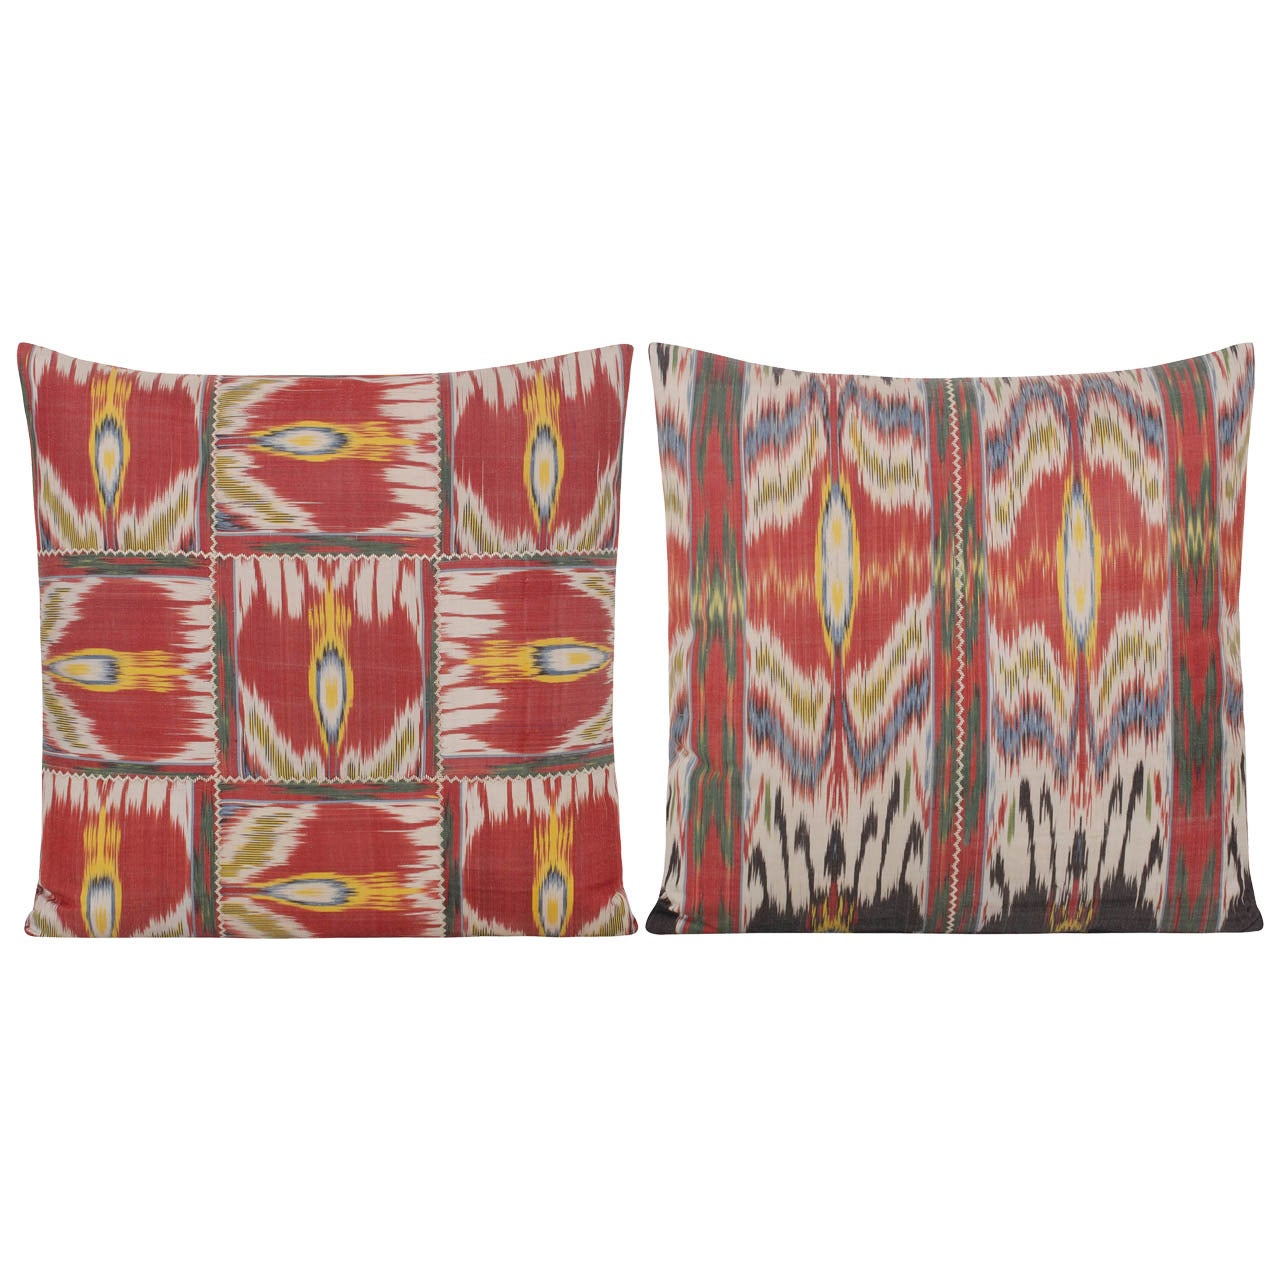 Pair of Yastik Isolabella Ikat Square Cushions by Rifat Ozbek For Sale